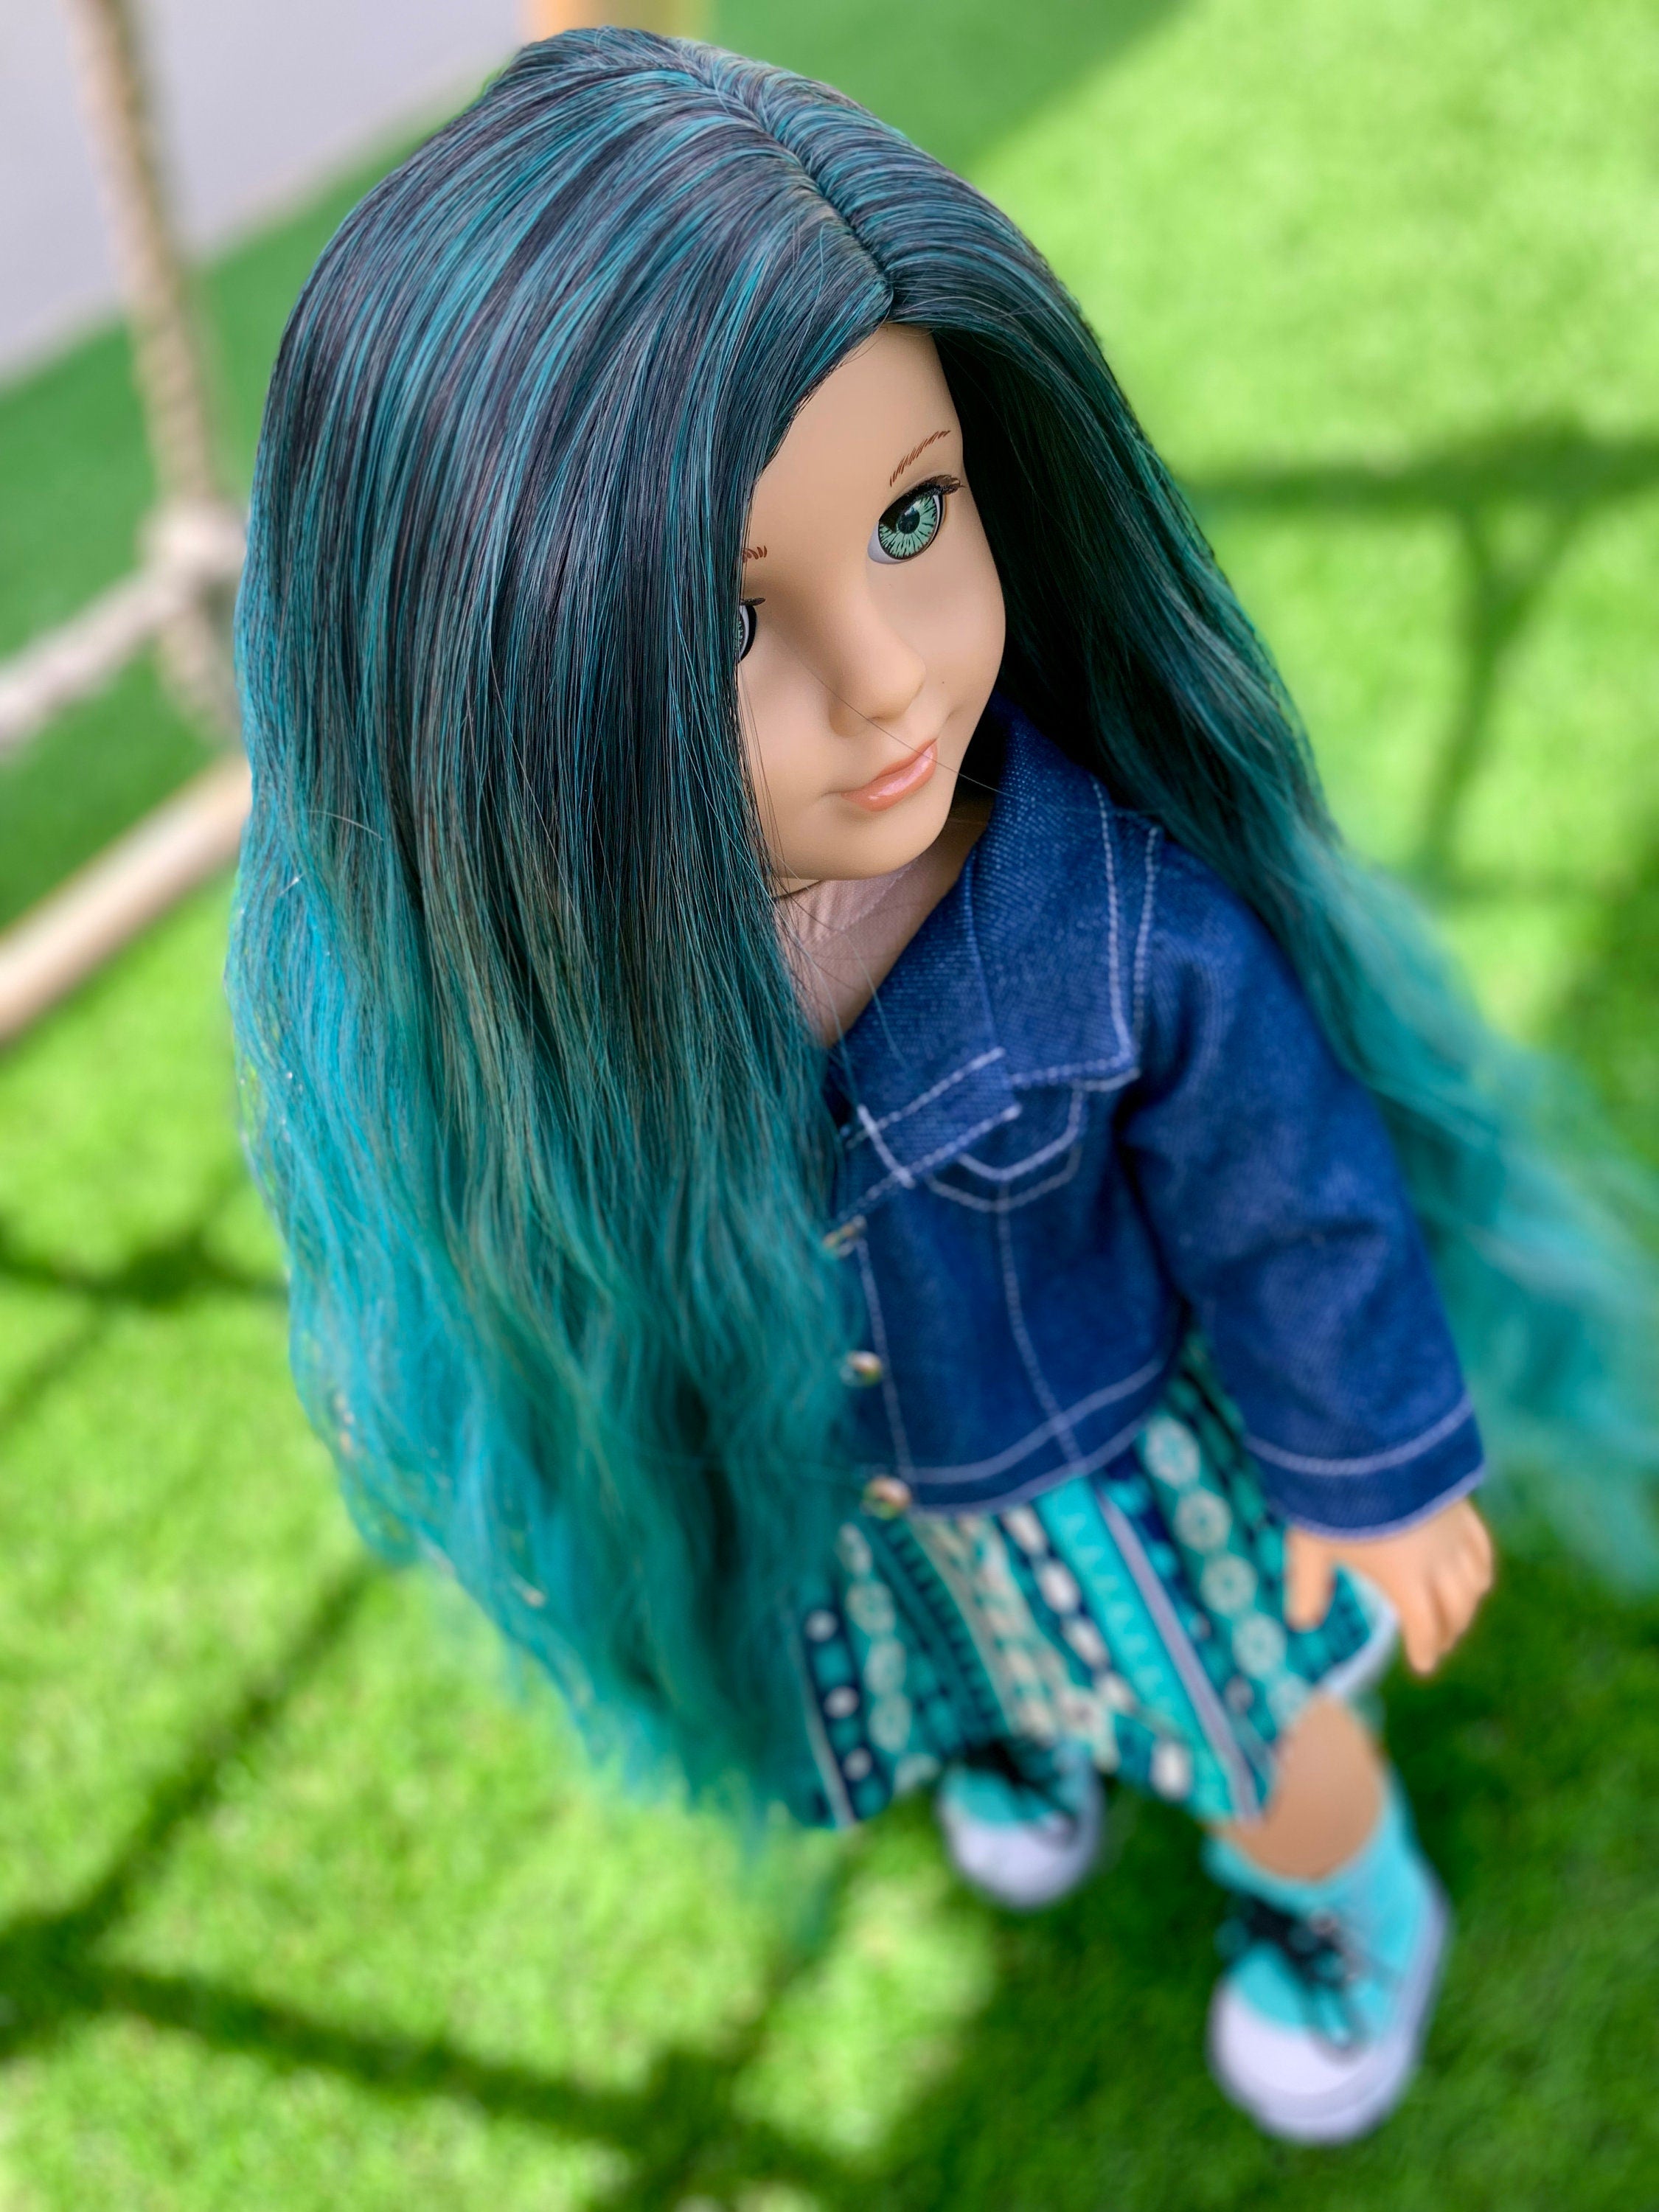 Custom DYED OMBRE Doll Wig for 18" American Girl Doll Heat Safe Tangle Resistant - fits 10-11" head size of all 18" dolls teal mermaid ombre